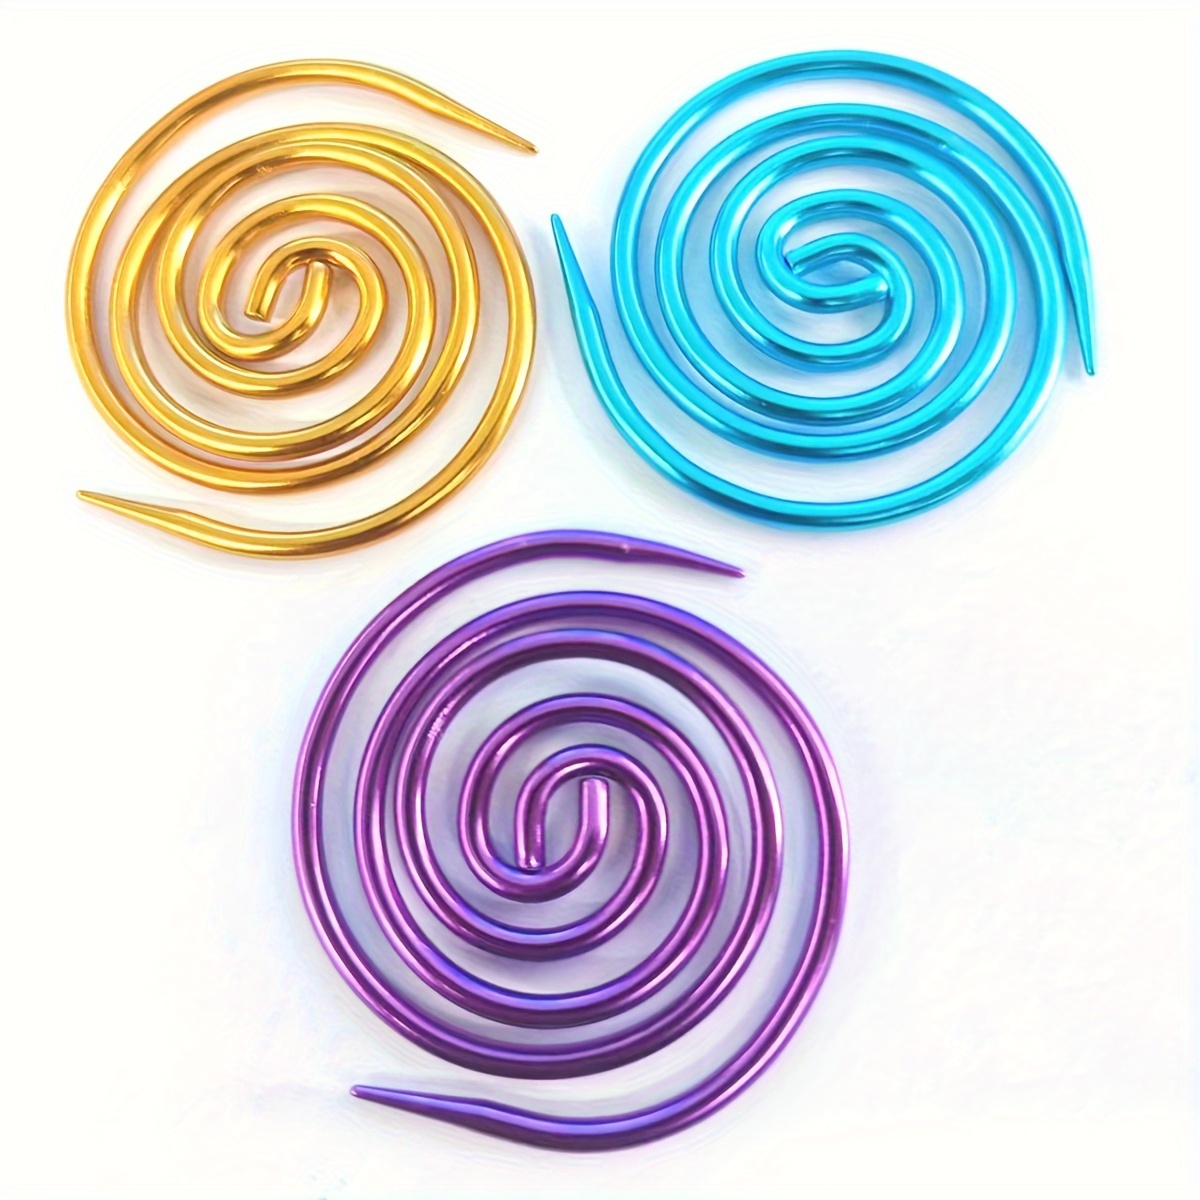 Spiral Cable Needle,Spiral Cable Knitting Needle,9PcsCable